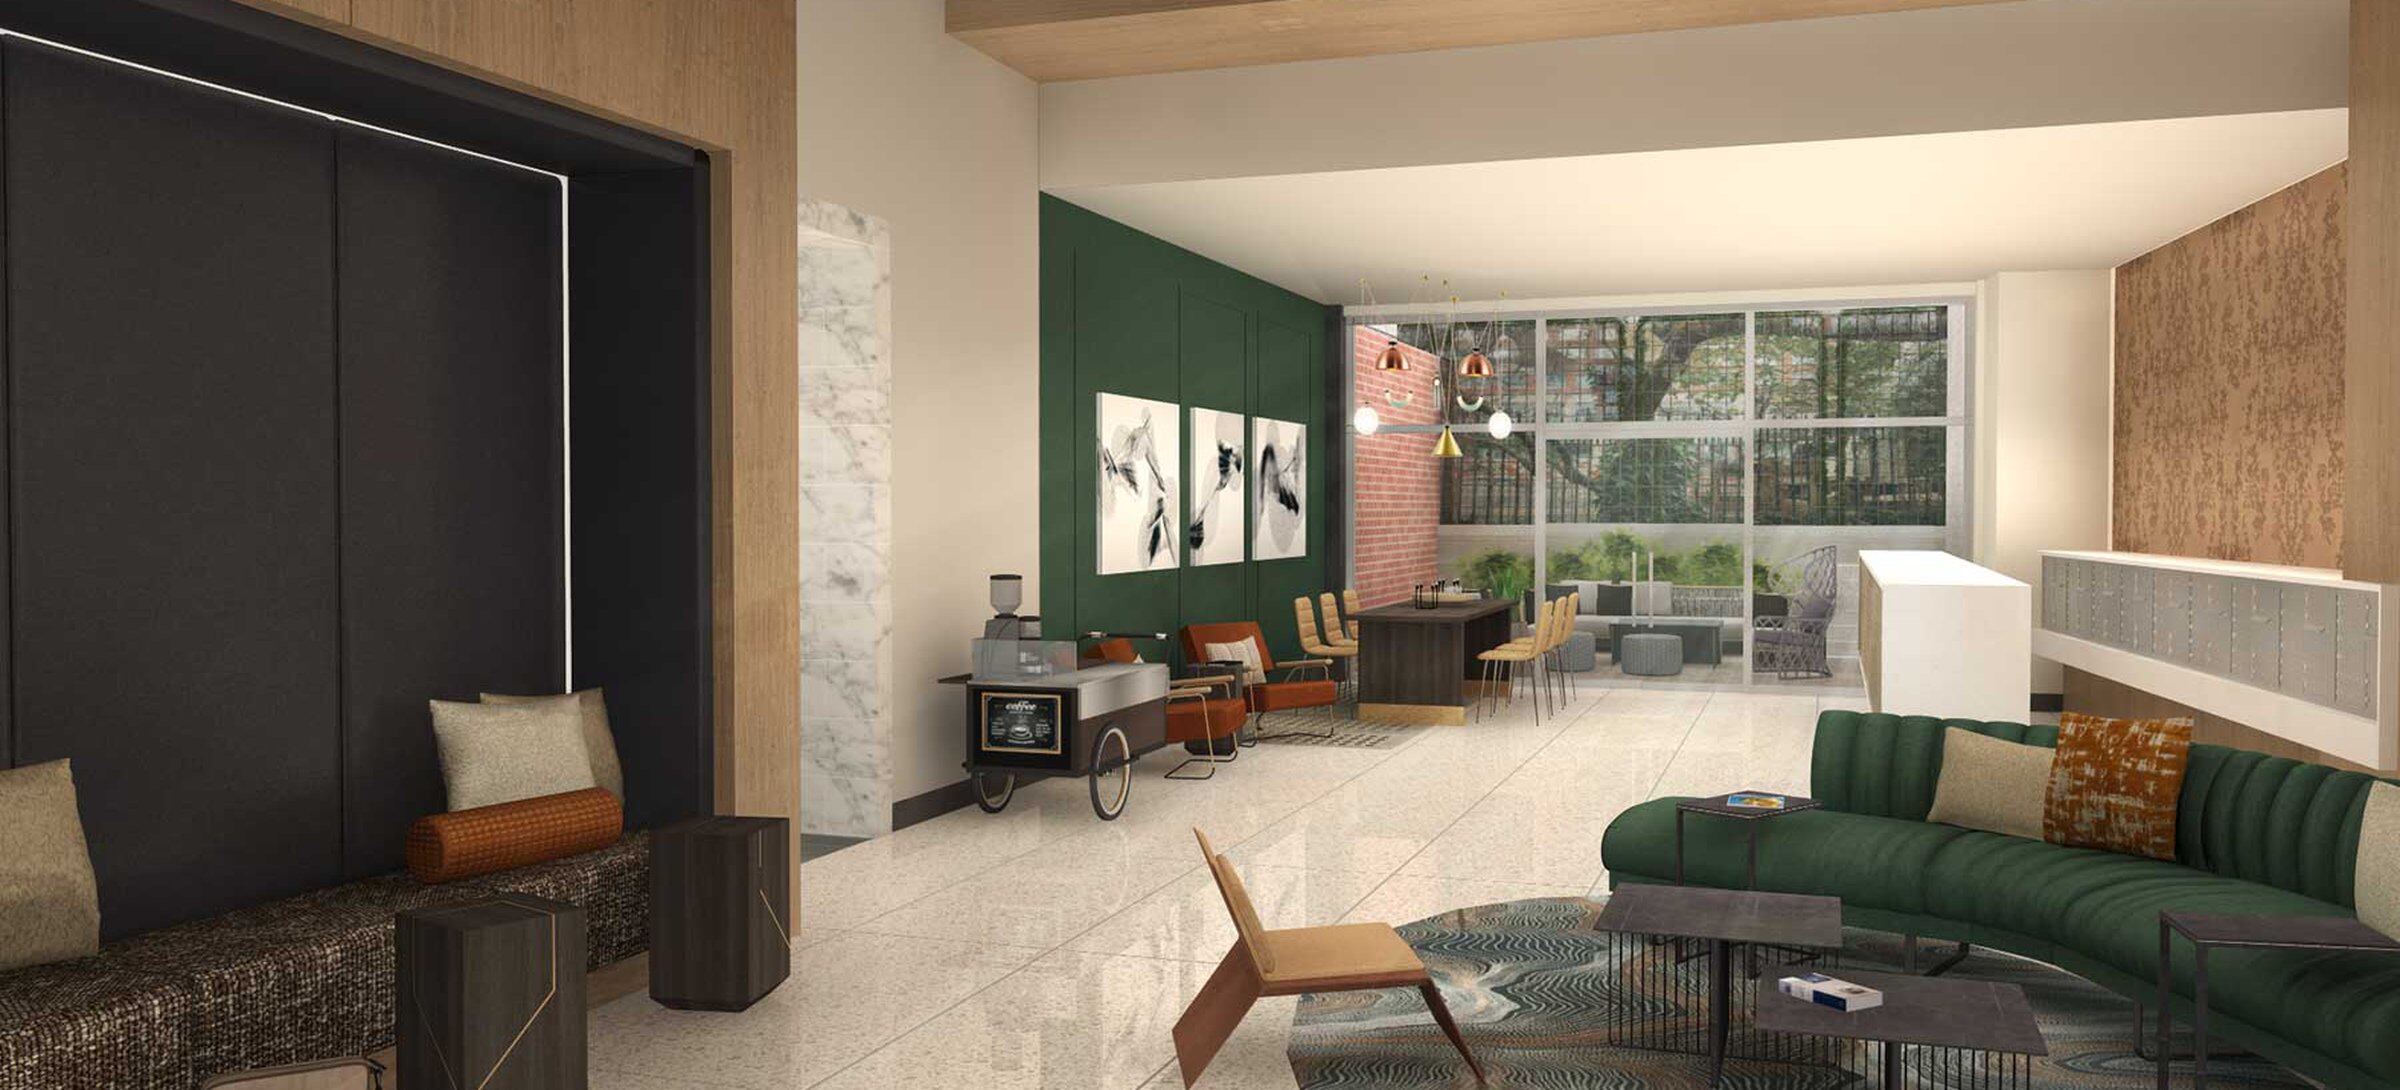 Coming Soon: Renovated lobby area with modern architecture and lounge furnishings (Rendering)